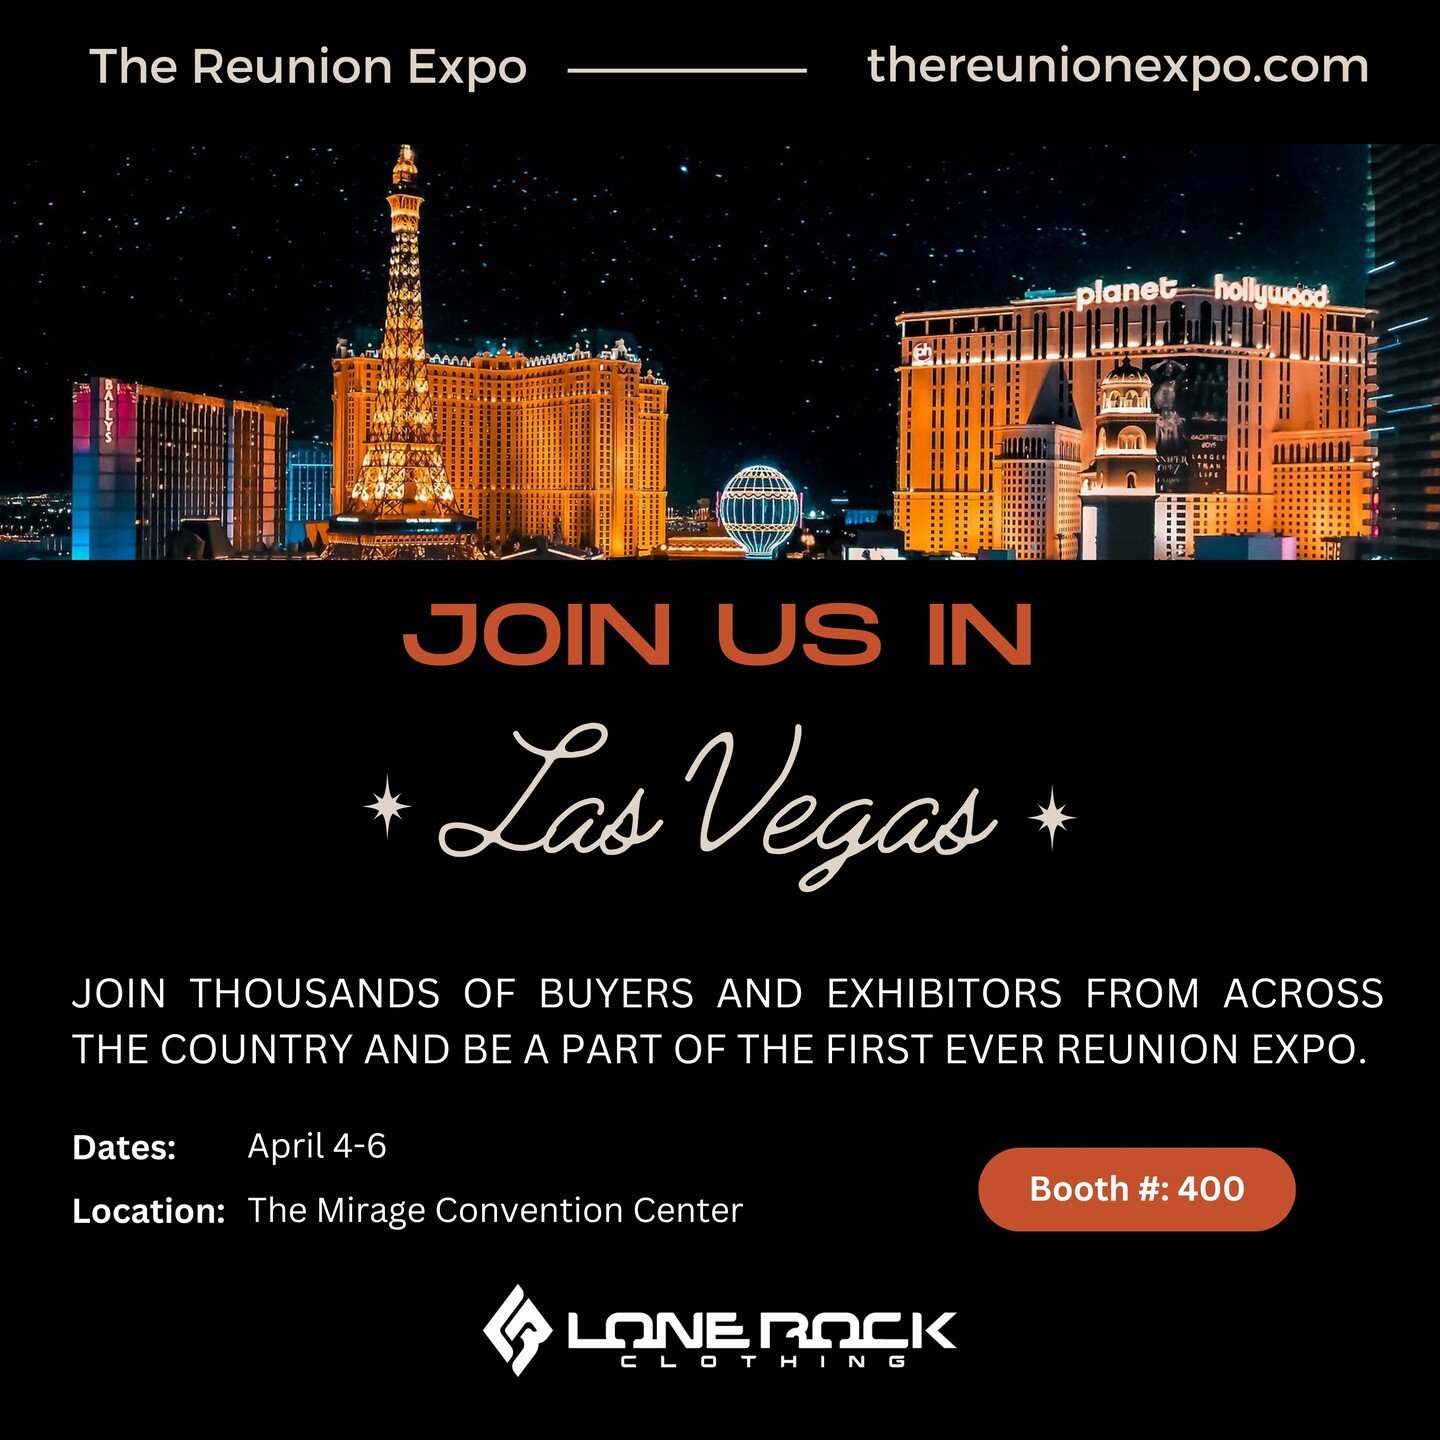 Pack your bags and join the excitement! ✨ Lone Rock Clothing invites you to the first-ever Reunion Expo in Las Vegas! Get ready to explore a world of souvenirs, gifts, and resort treasures while mingling with buyers and exhibitors from coast to coast